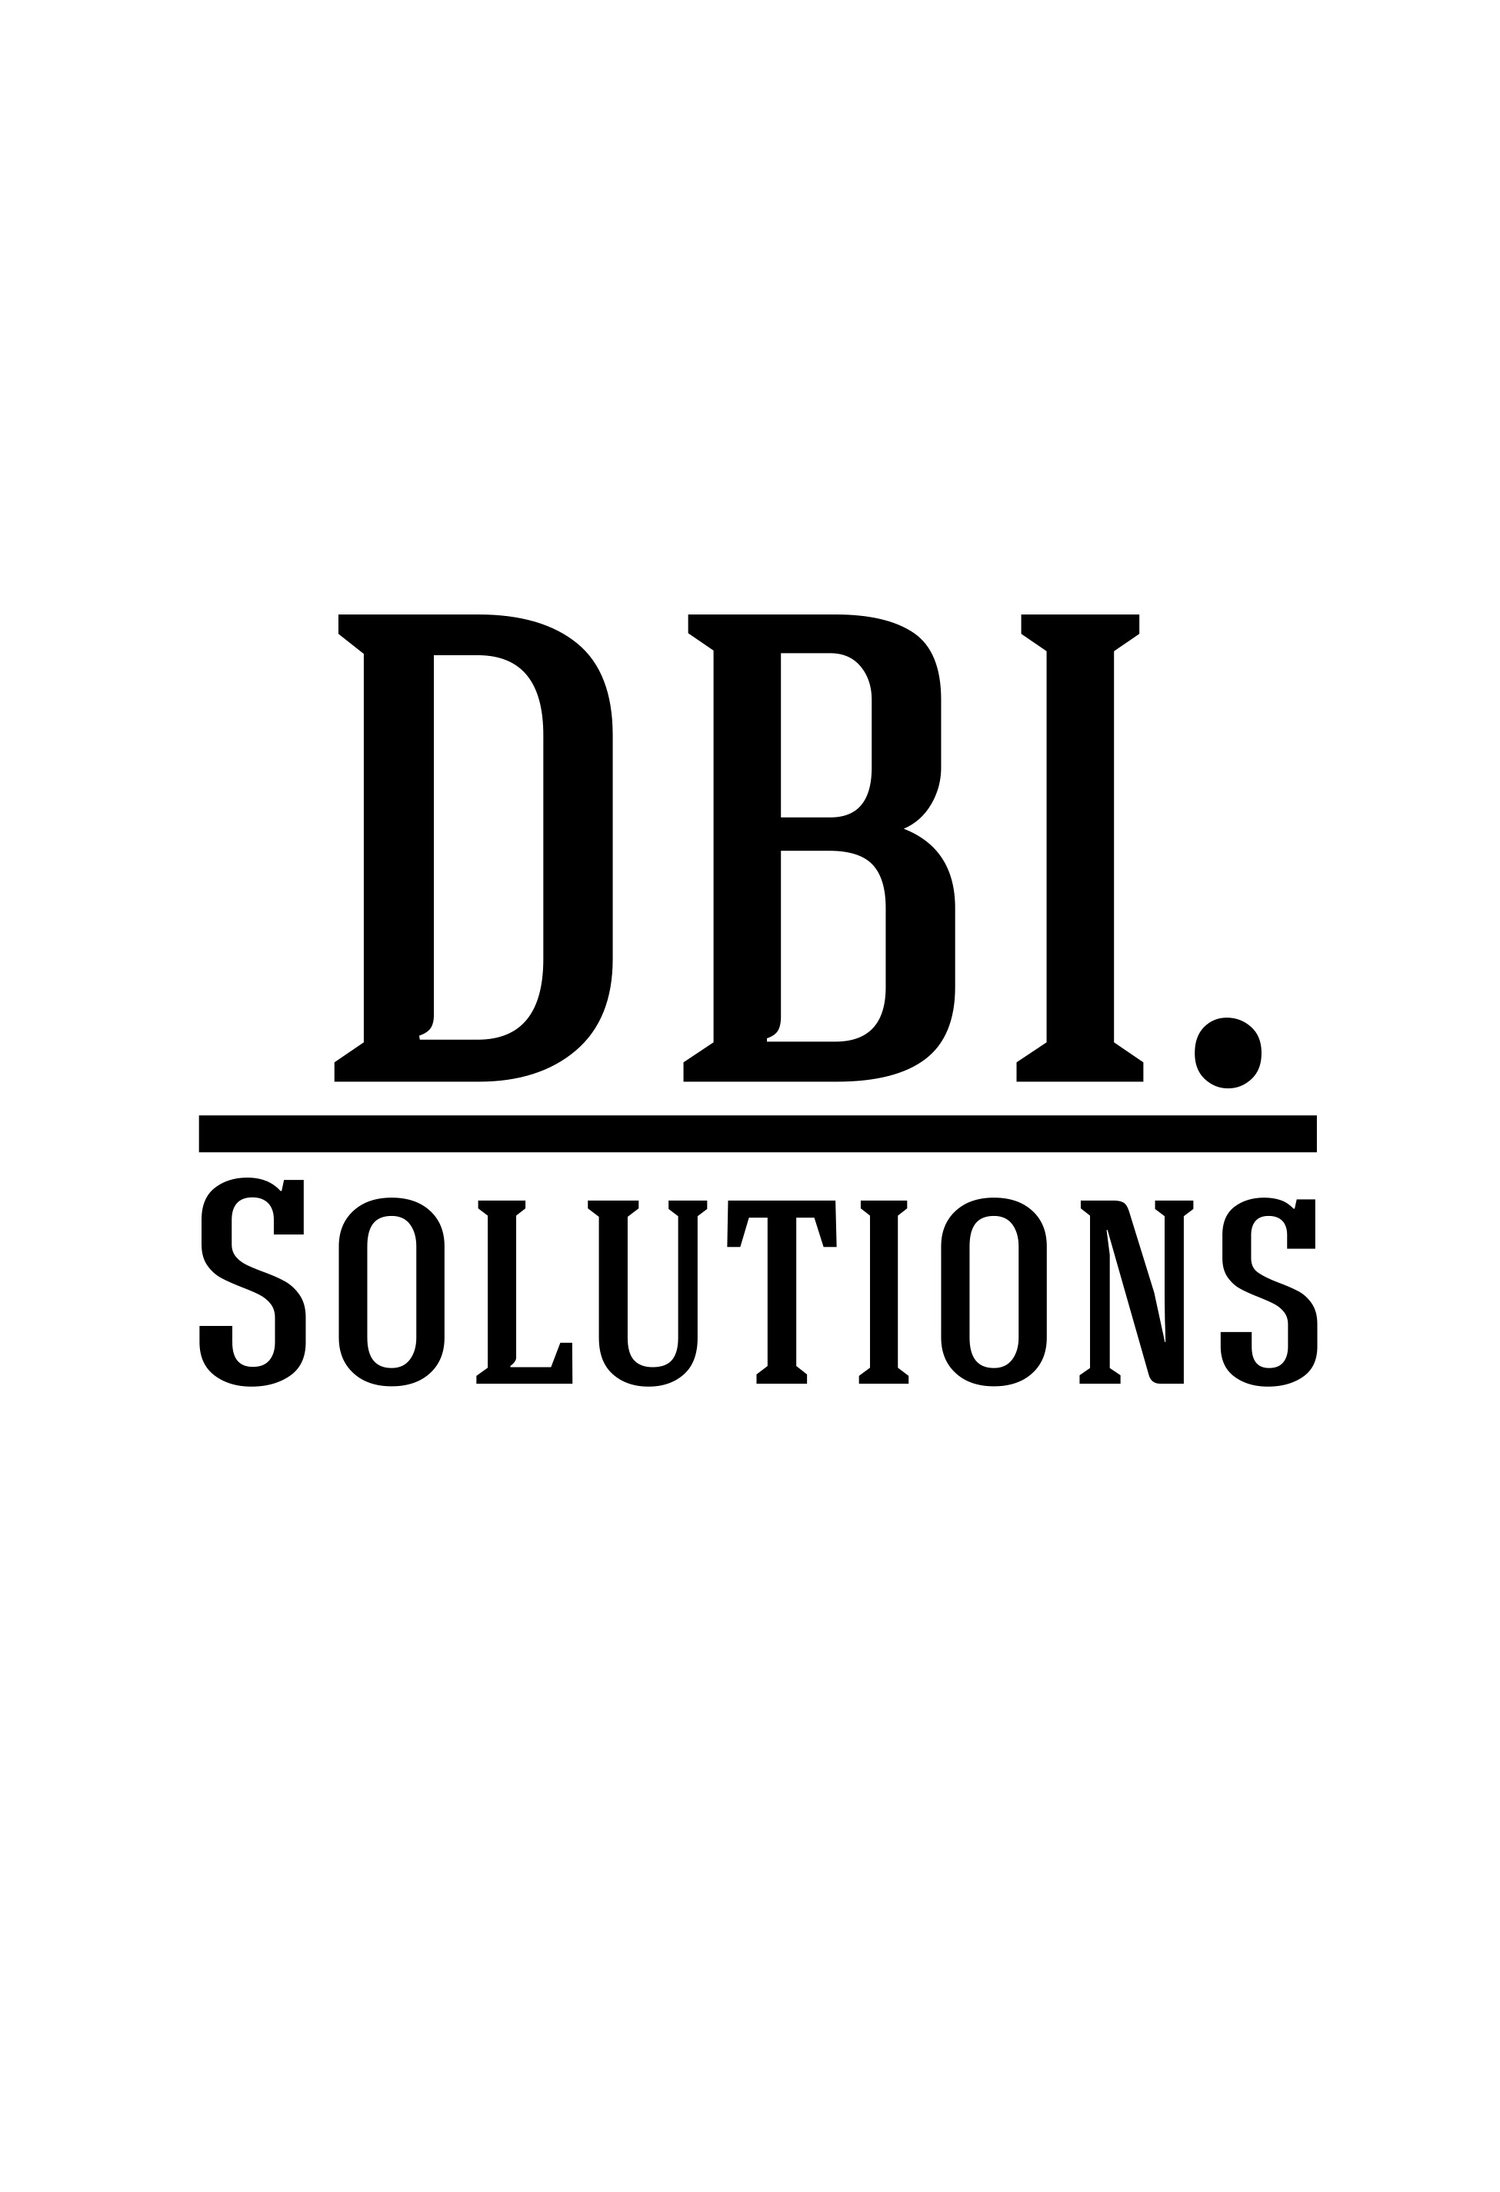 DBI Solutions - Home Improvement &amp; Handyman Services for the SCV